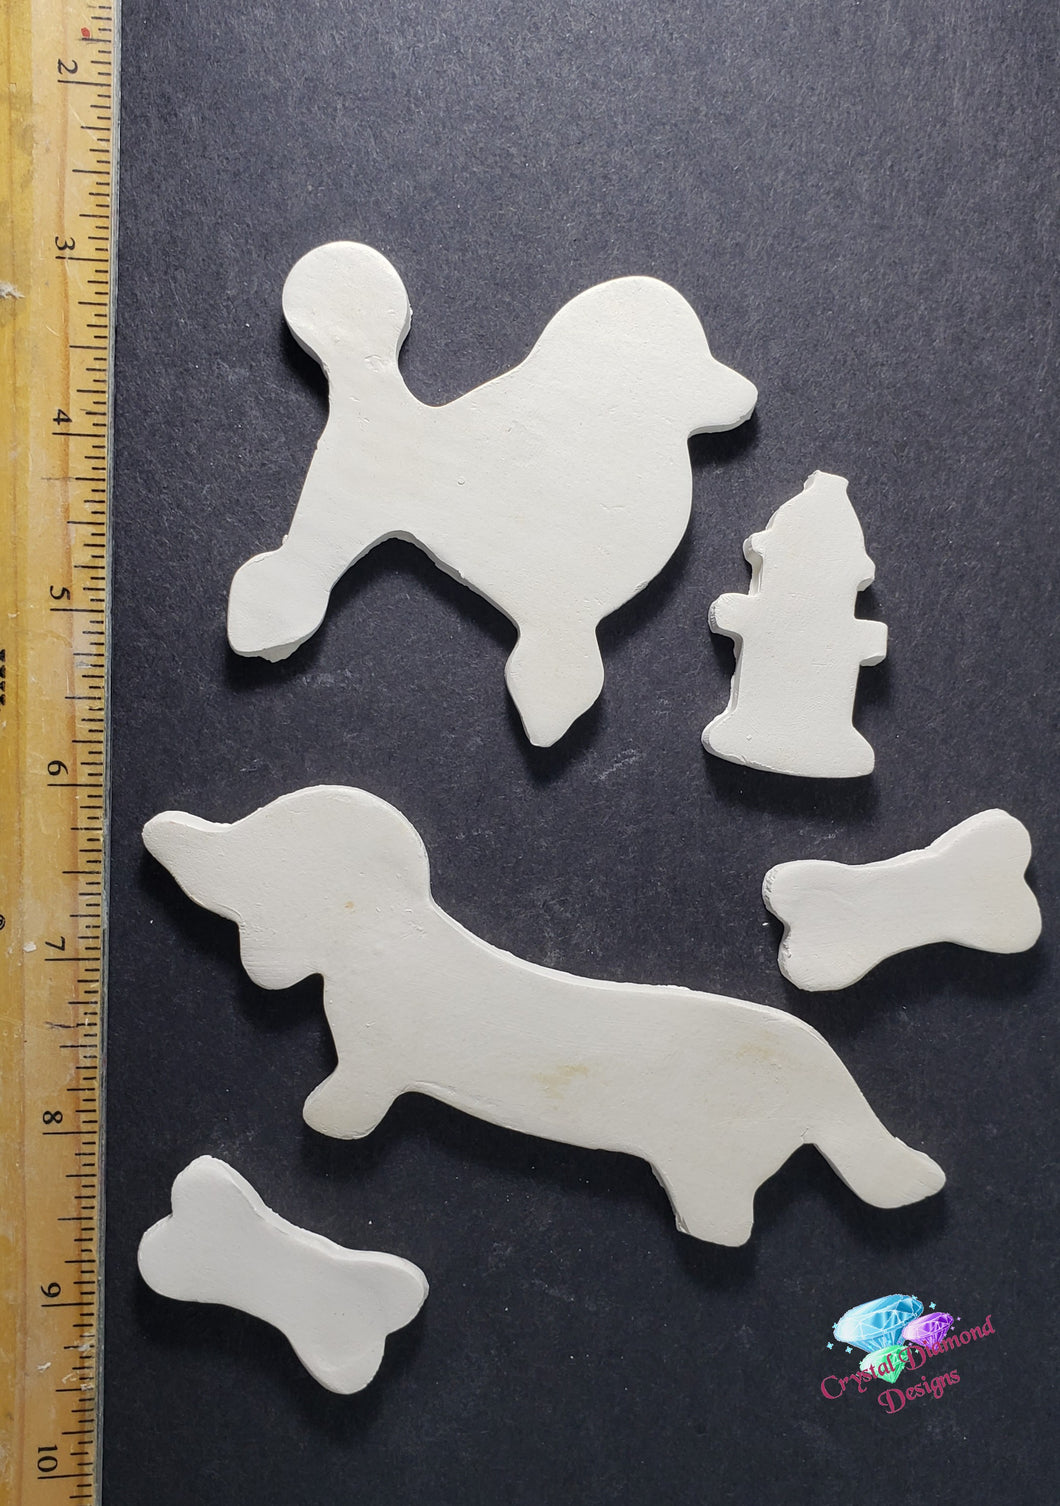 Bisqueware Doggy Items Handmade Tiles  B133